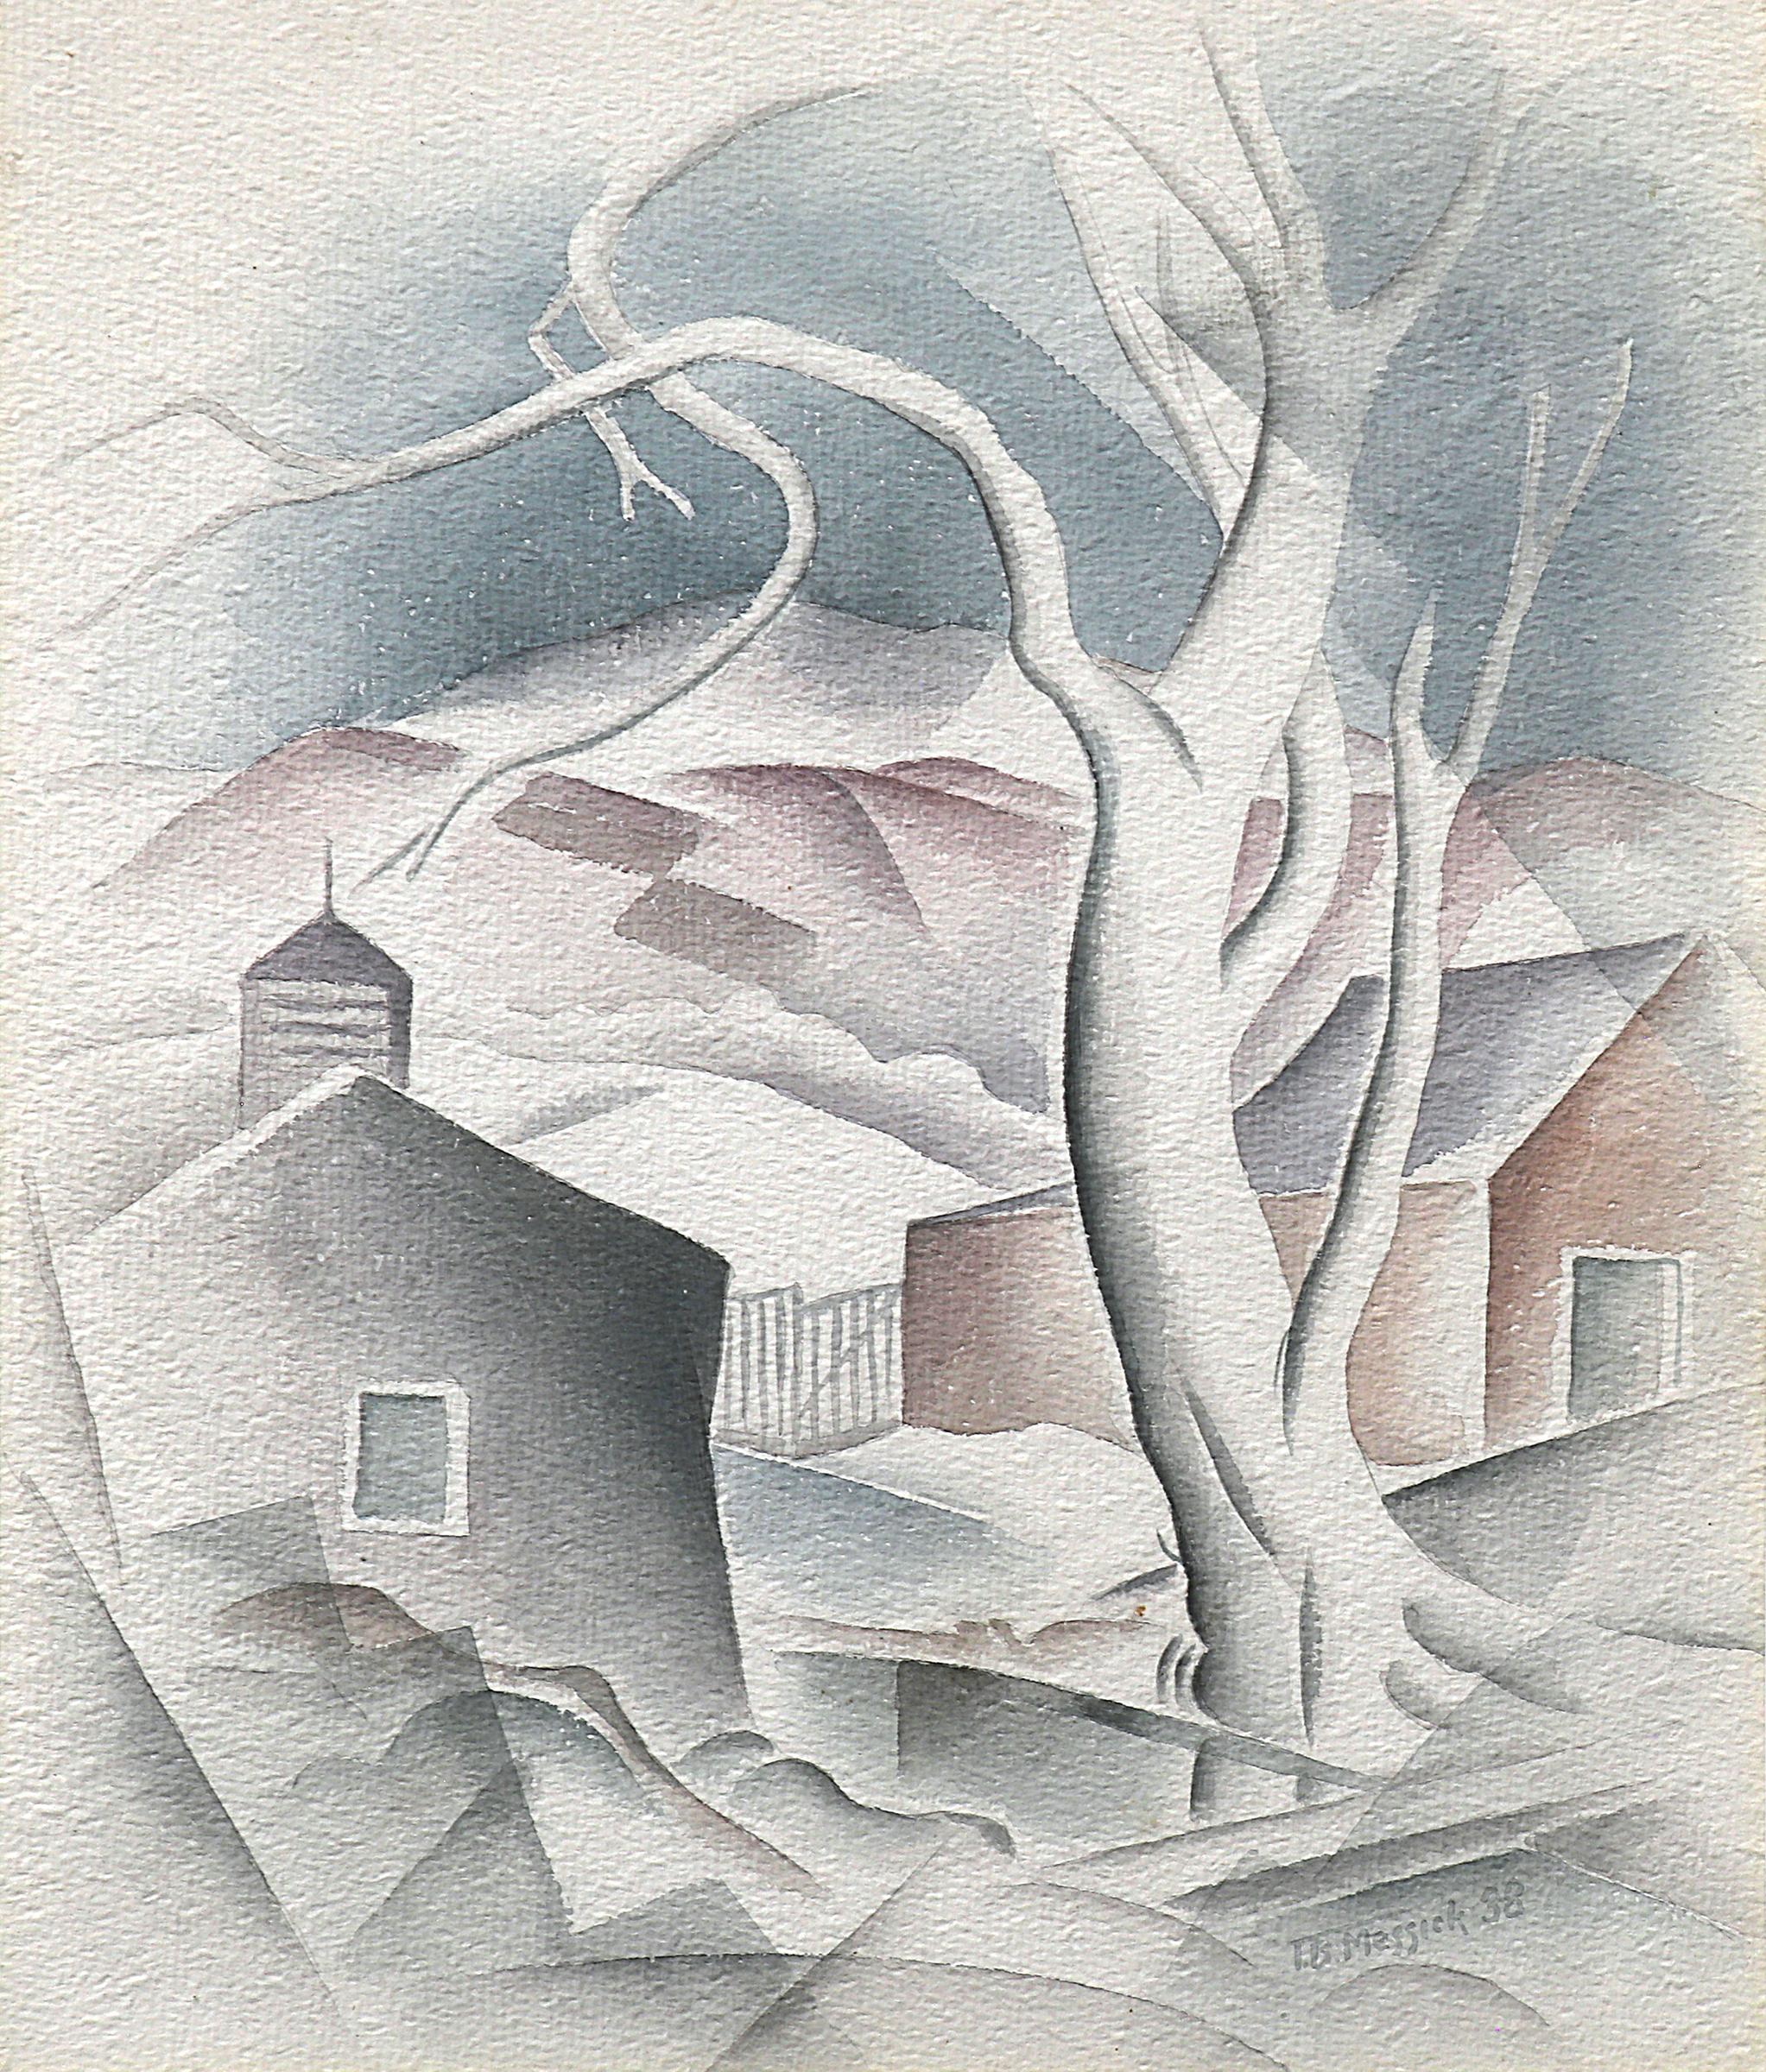 1930s Colorado Modernist Landscape Painting of Trees, Mountains & Houses - Art by Turner B. Messick